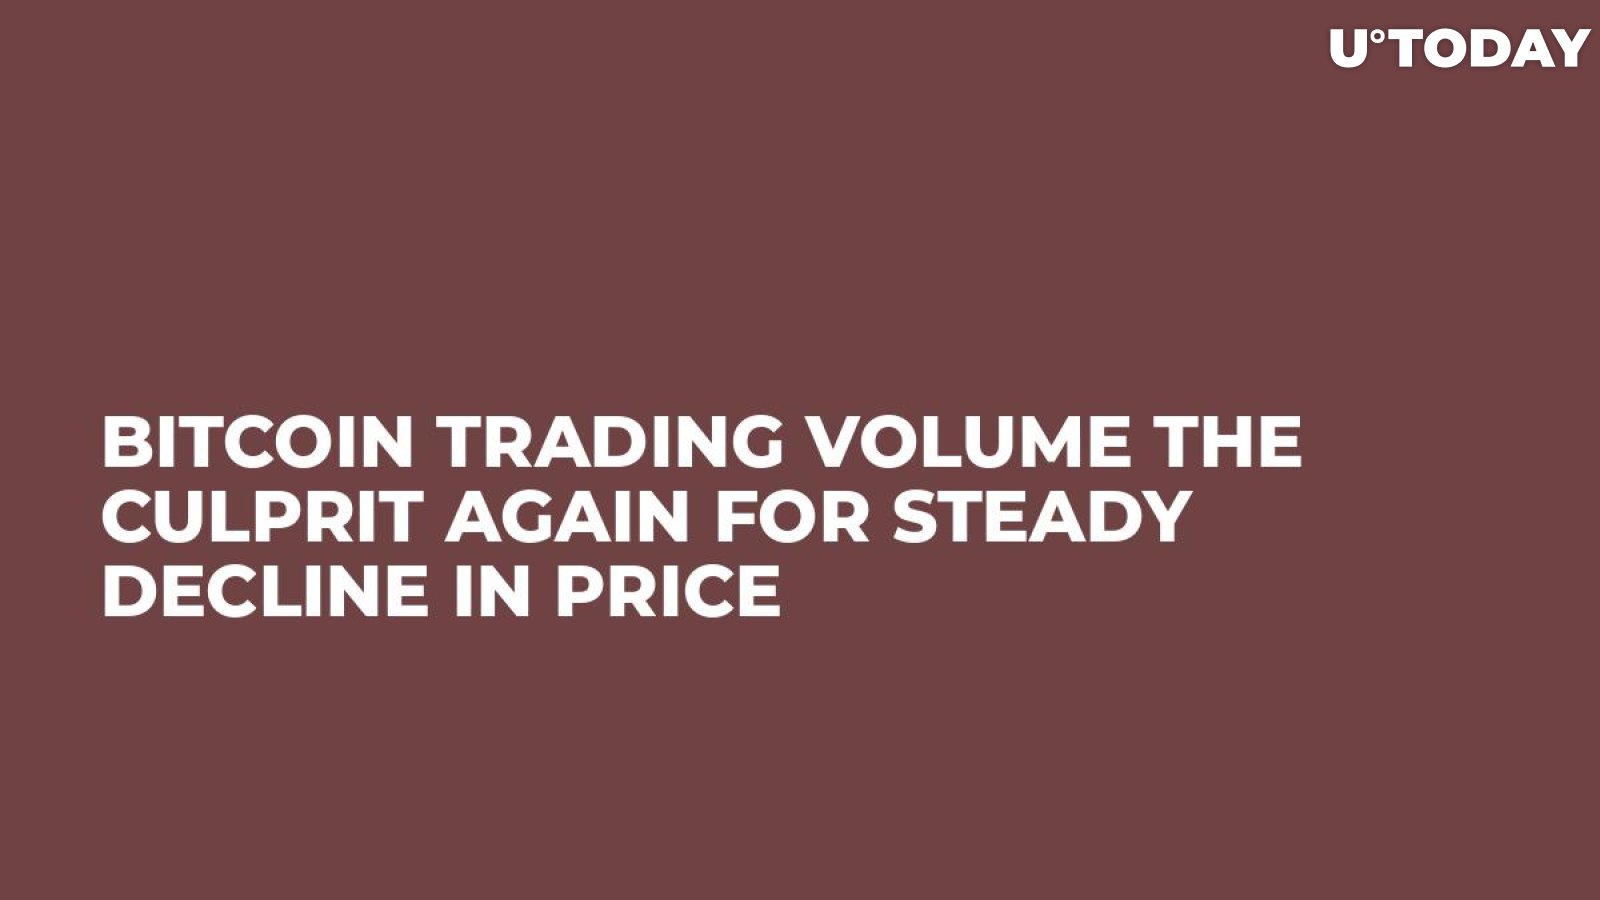 Bitcoin Trading Volume the Culprit Again for Steady Decline in Price